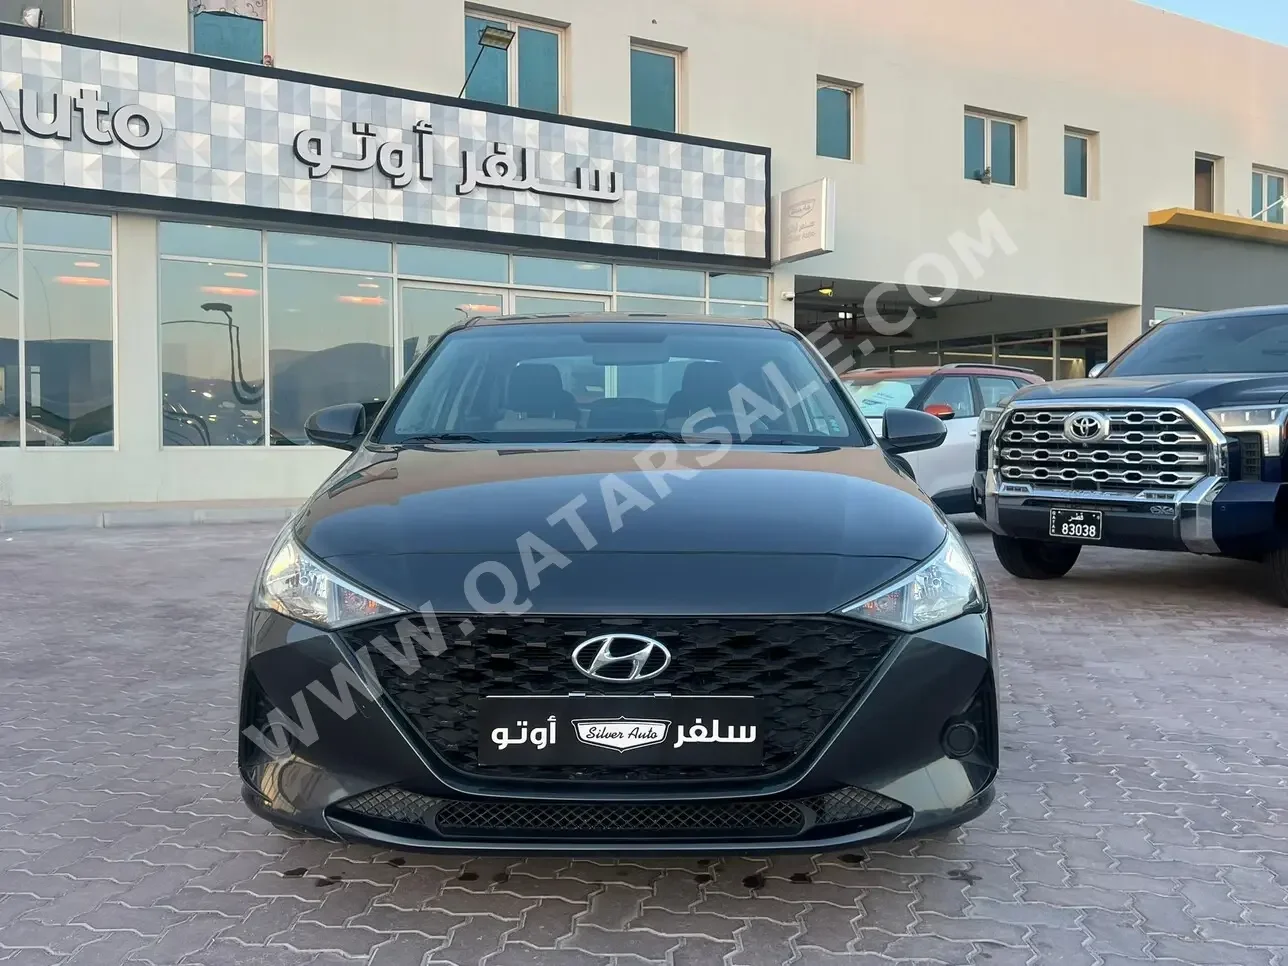 Hyundai  Accent  2022  Automatic  68,000 Km  4 Cylinder  Front Wheel Drive (FWD)  Sedan  Gray  With Warranty